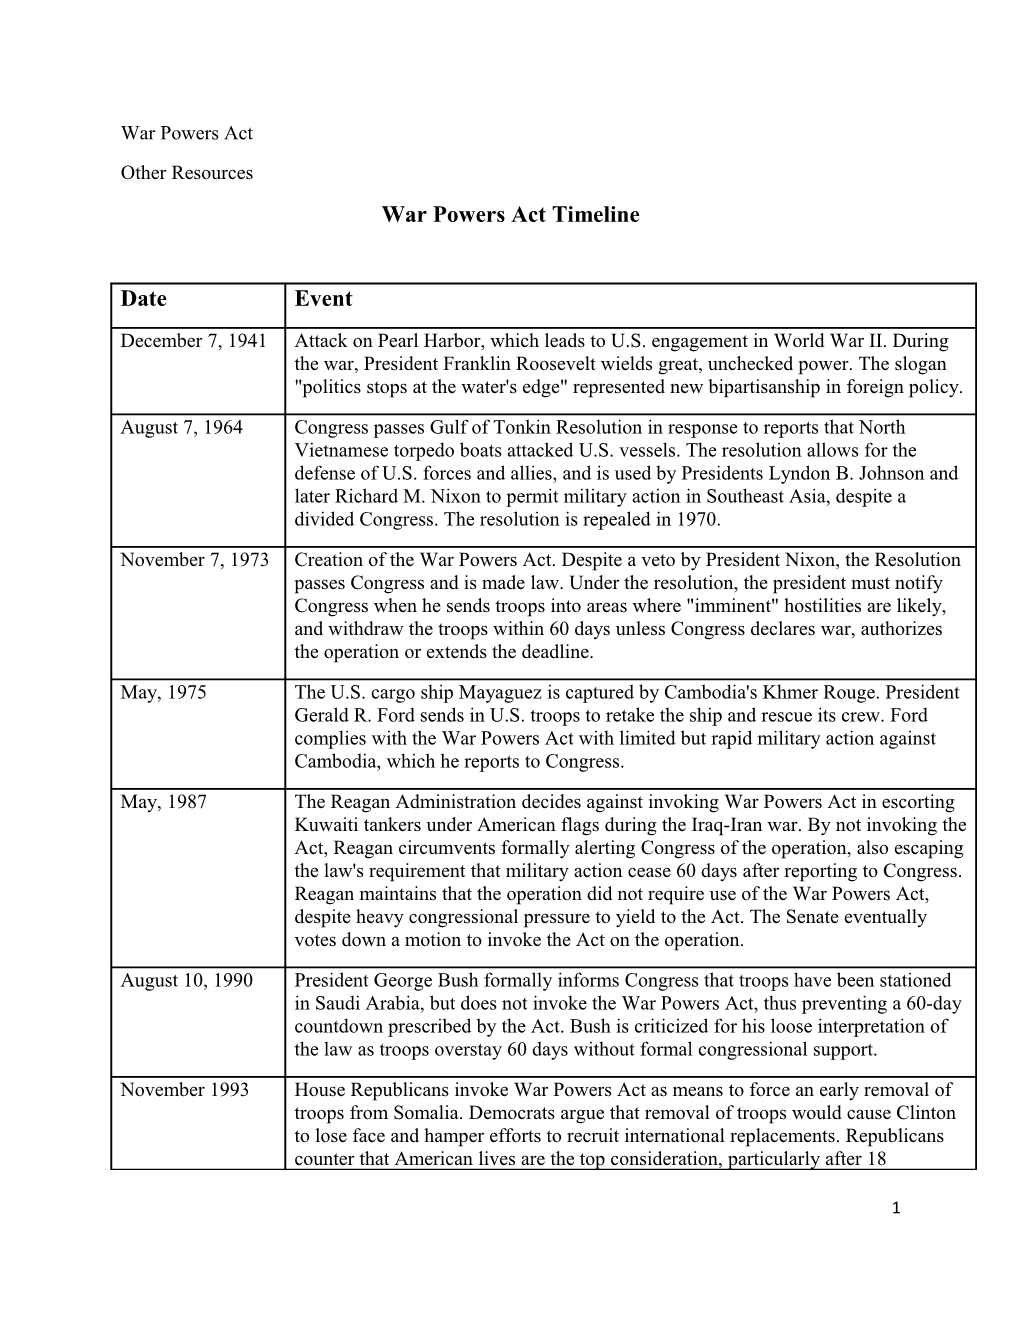 War Powers Act Timeline